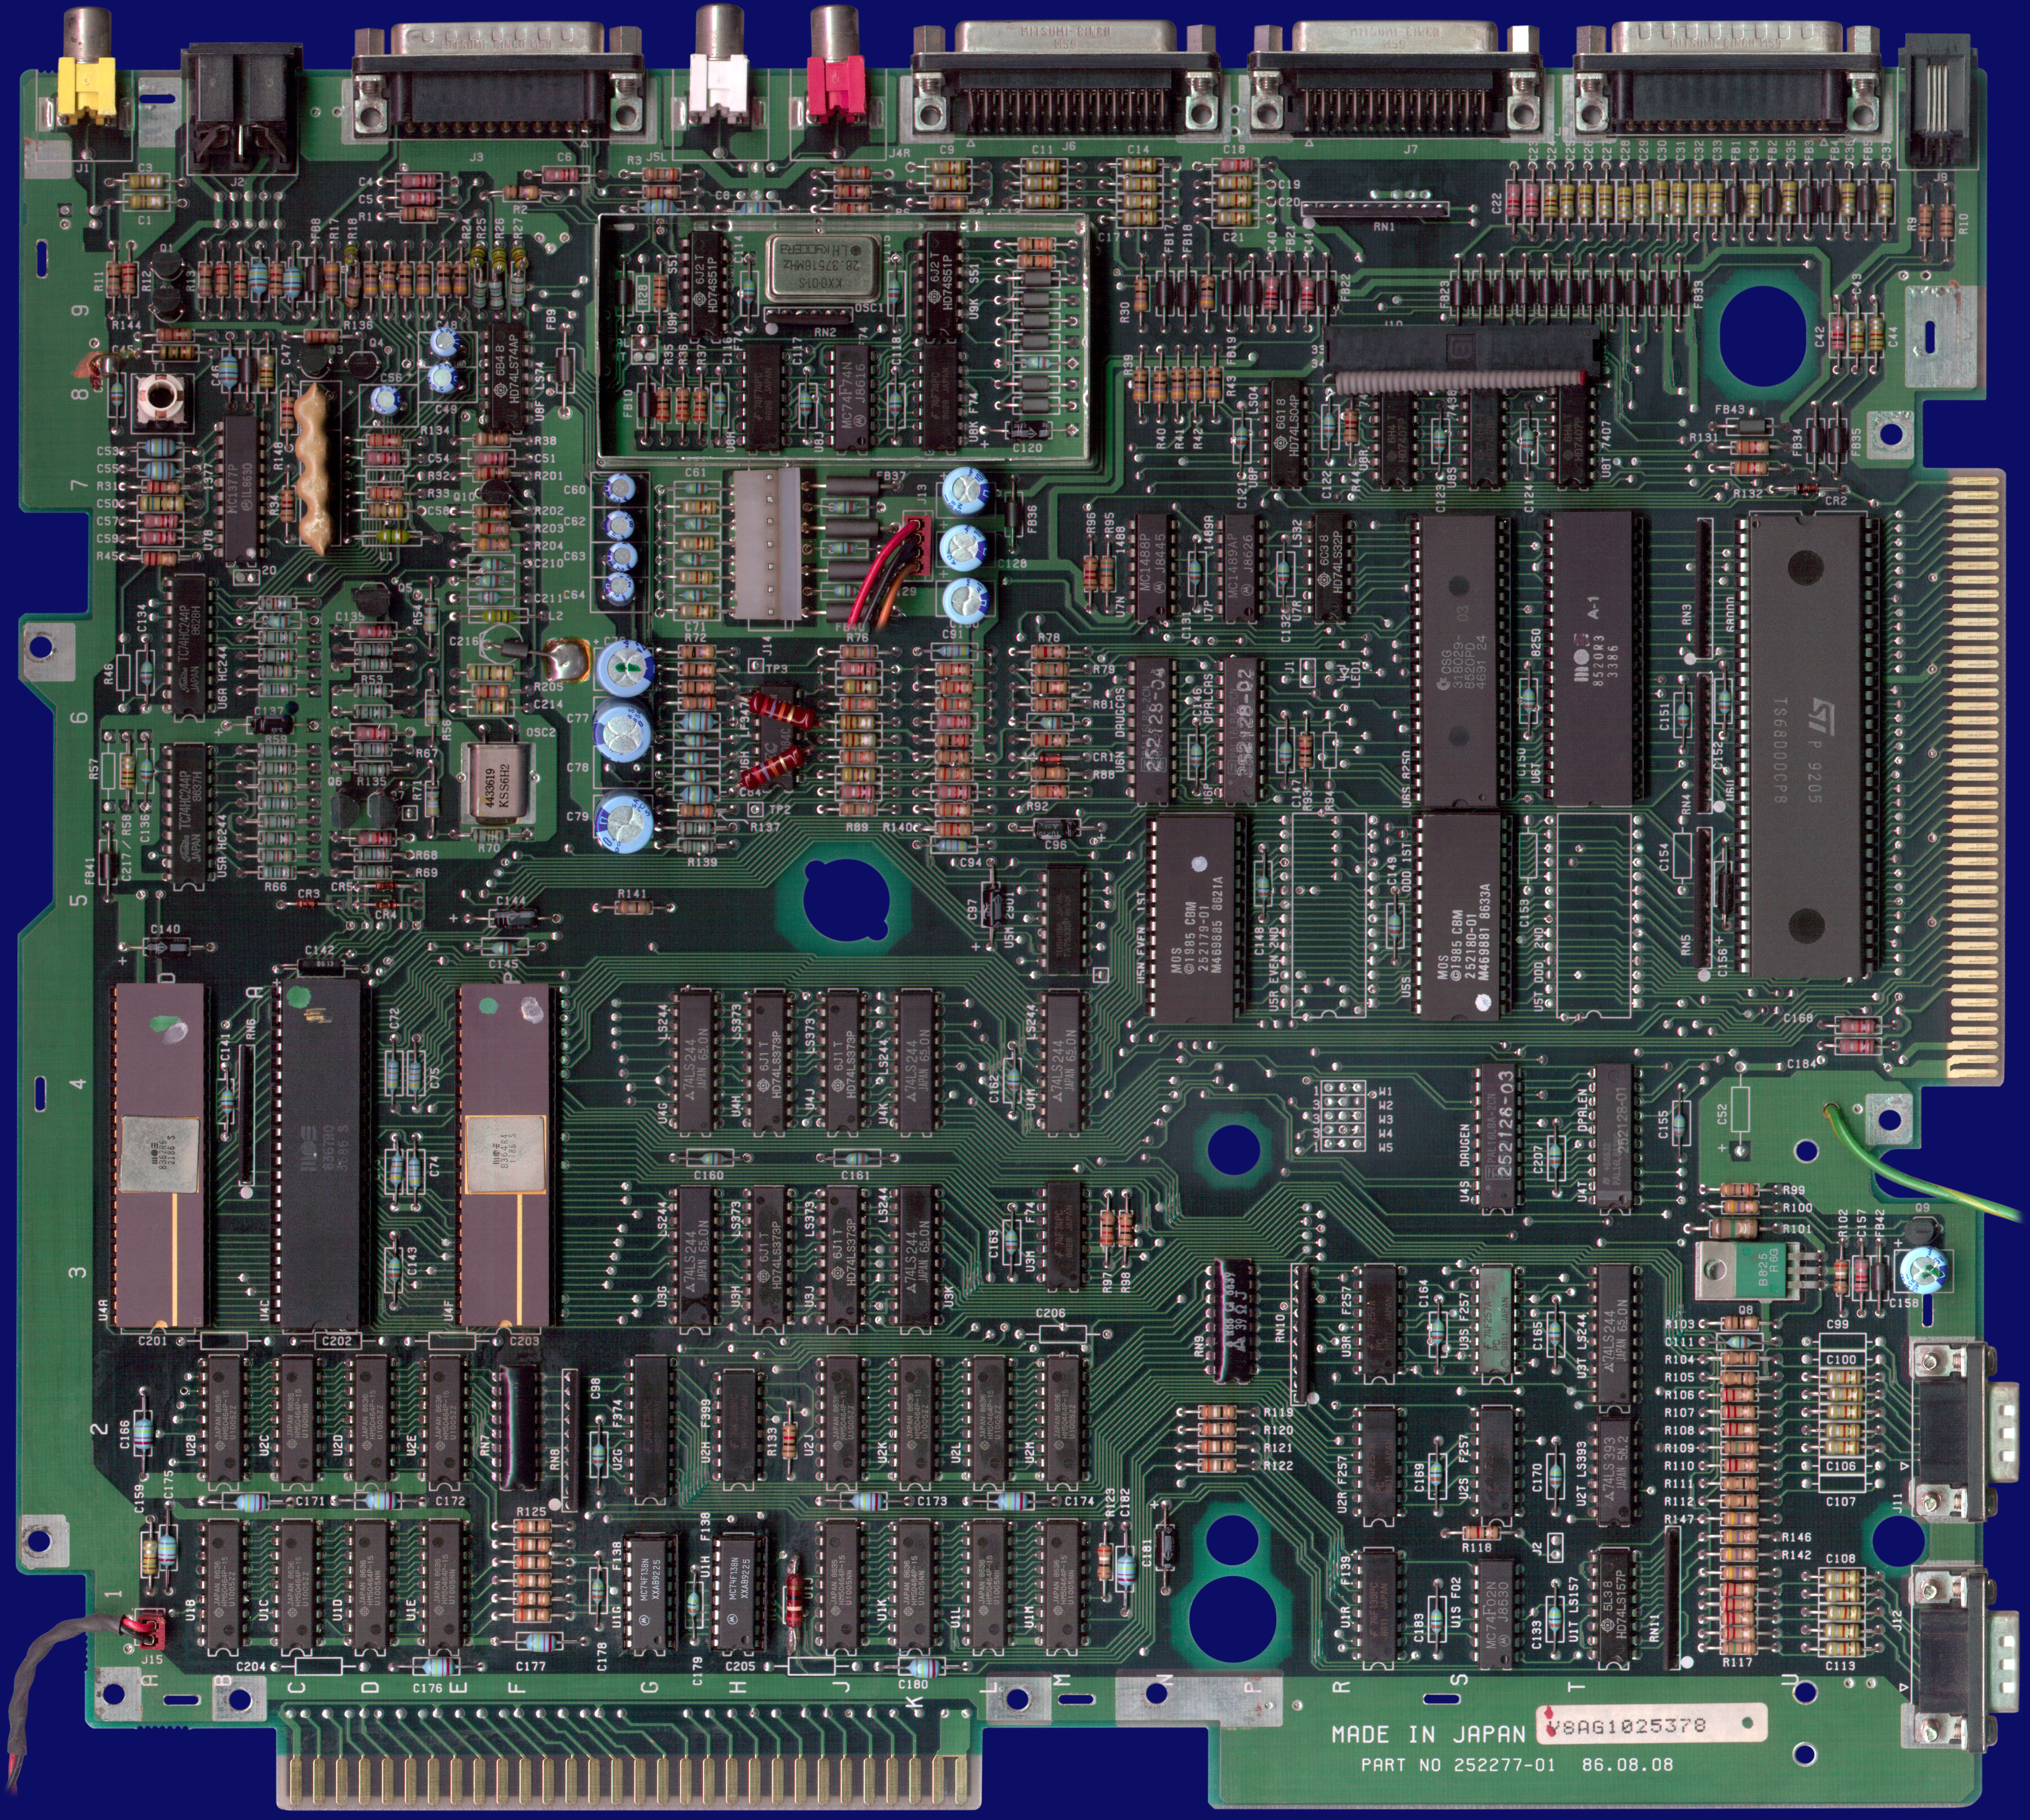 Commodore Amiga 1000 - PAL motherboard, front side